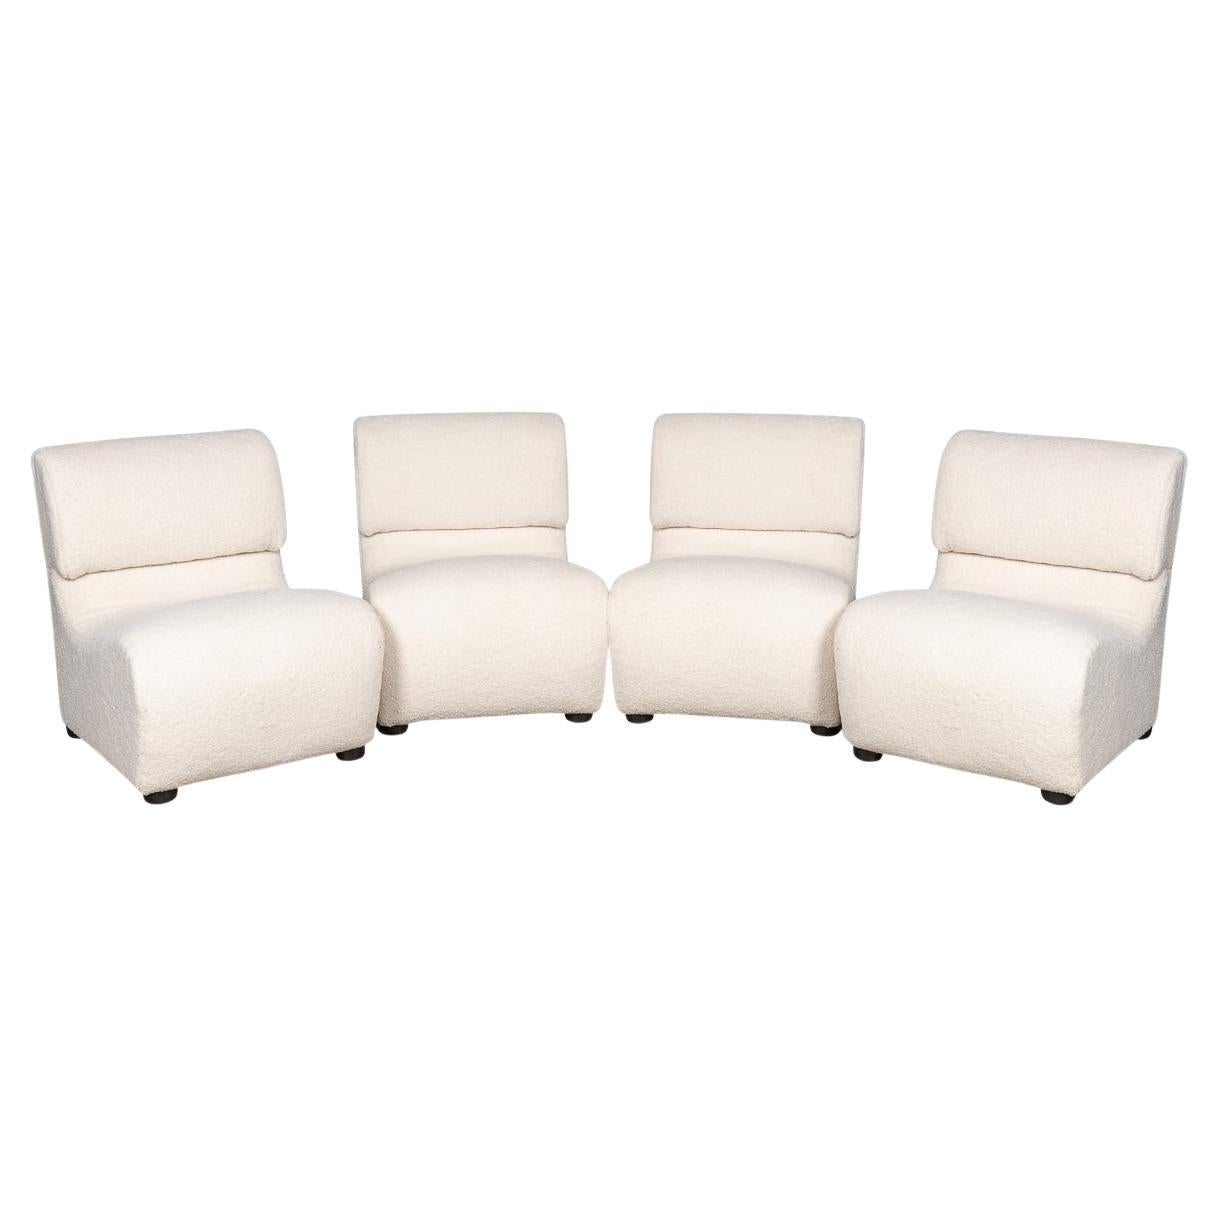 20th Century Set Of Four Seats In Cream Boucle, c.1980 For Sale